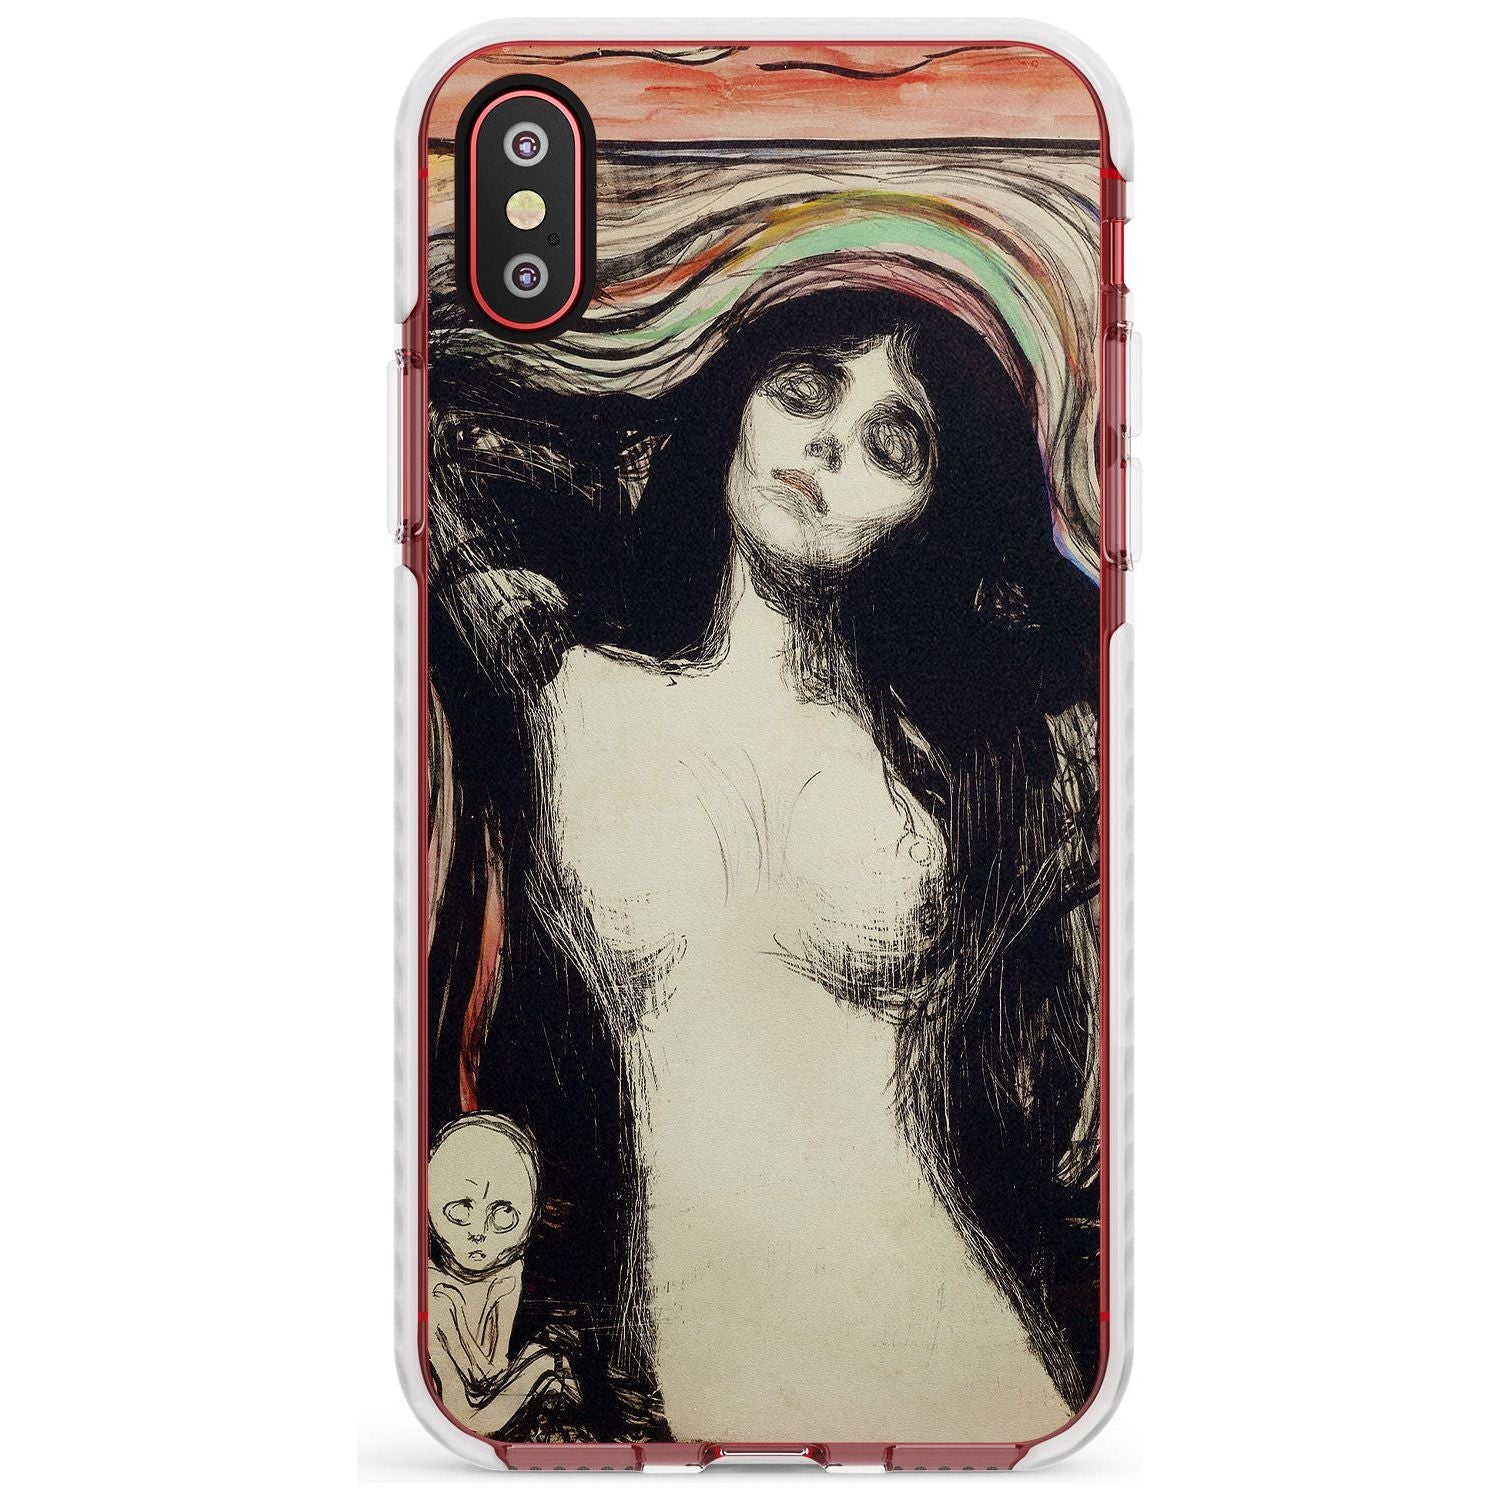 Madonna Impact Phone Case for iPhone X XS Max XR